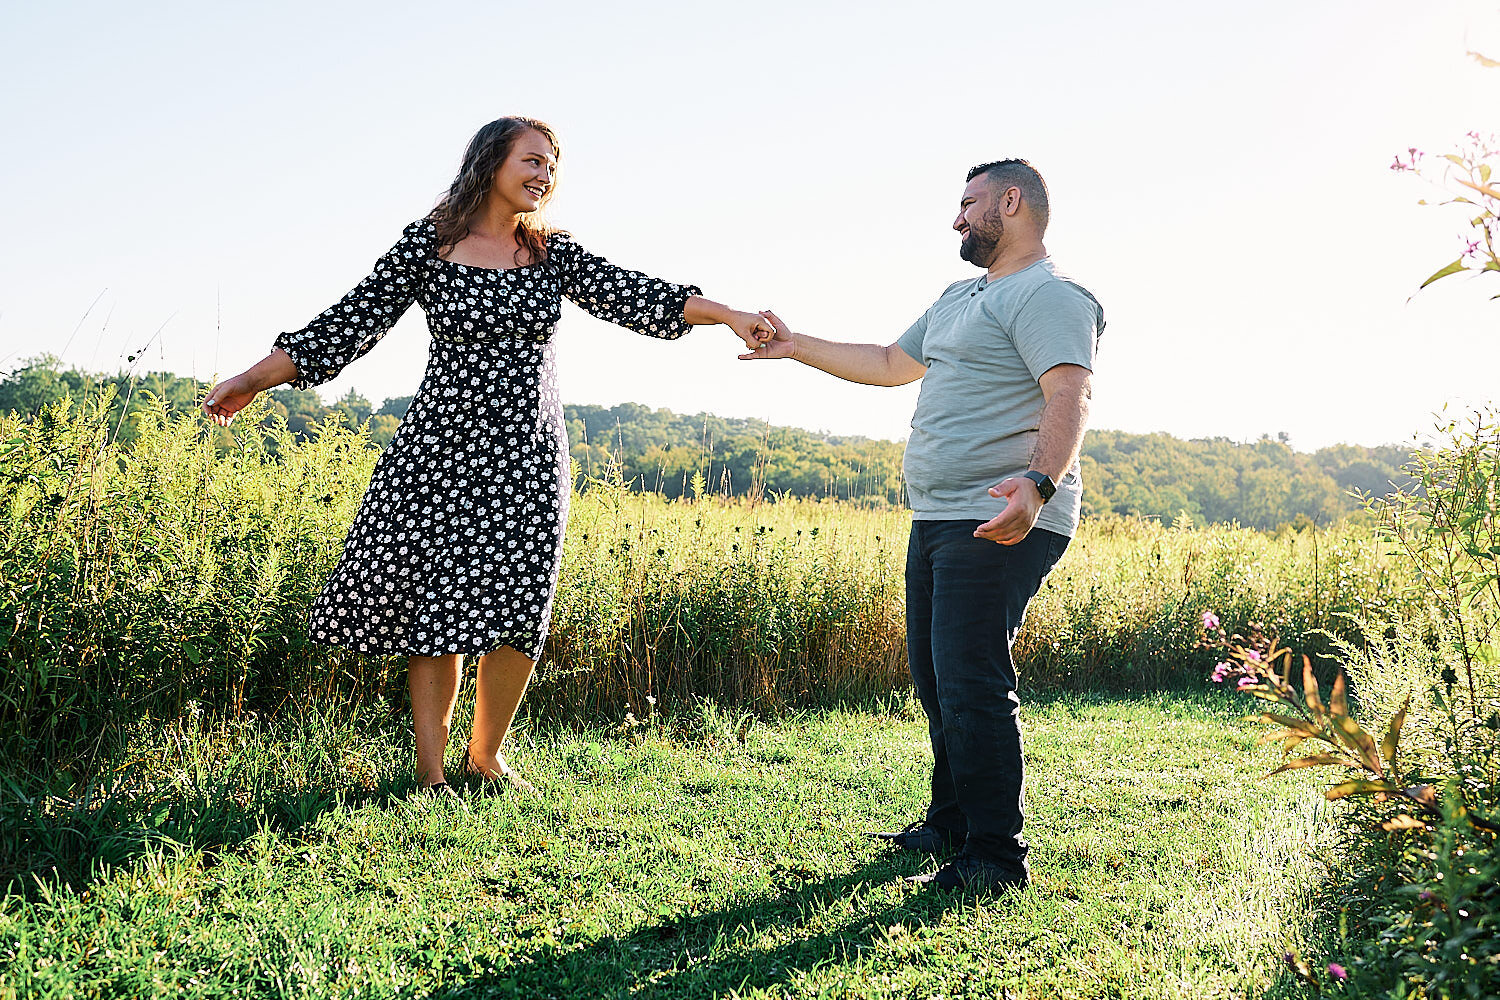  Sarah Trovato and Erick Ortiz are celebrating their engagement to get married on a hot summer day in Fern Hollow Nature Center near Sewickley, Pennsylvania. They look blissfully happy and joyful. 